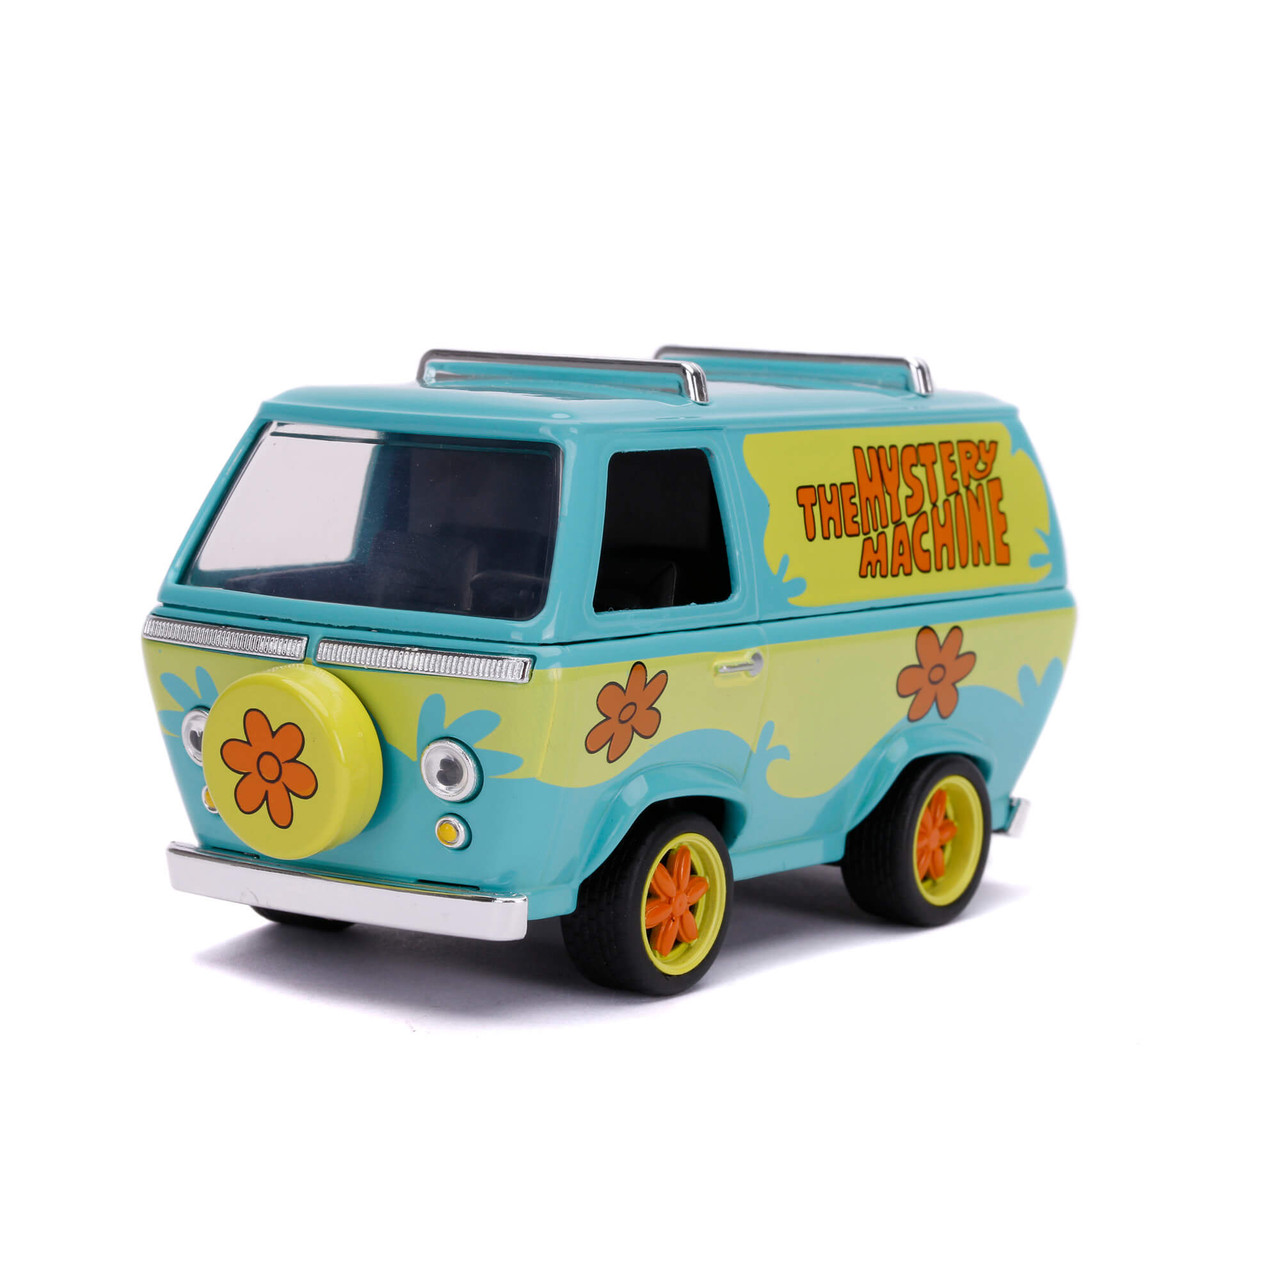 Jada toys 1/32 Hollywood Rides Mystery Machine Scooby-Doo Vehicle  Multicolor